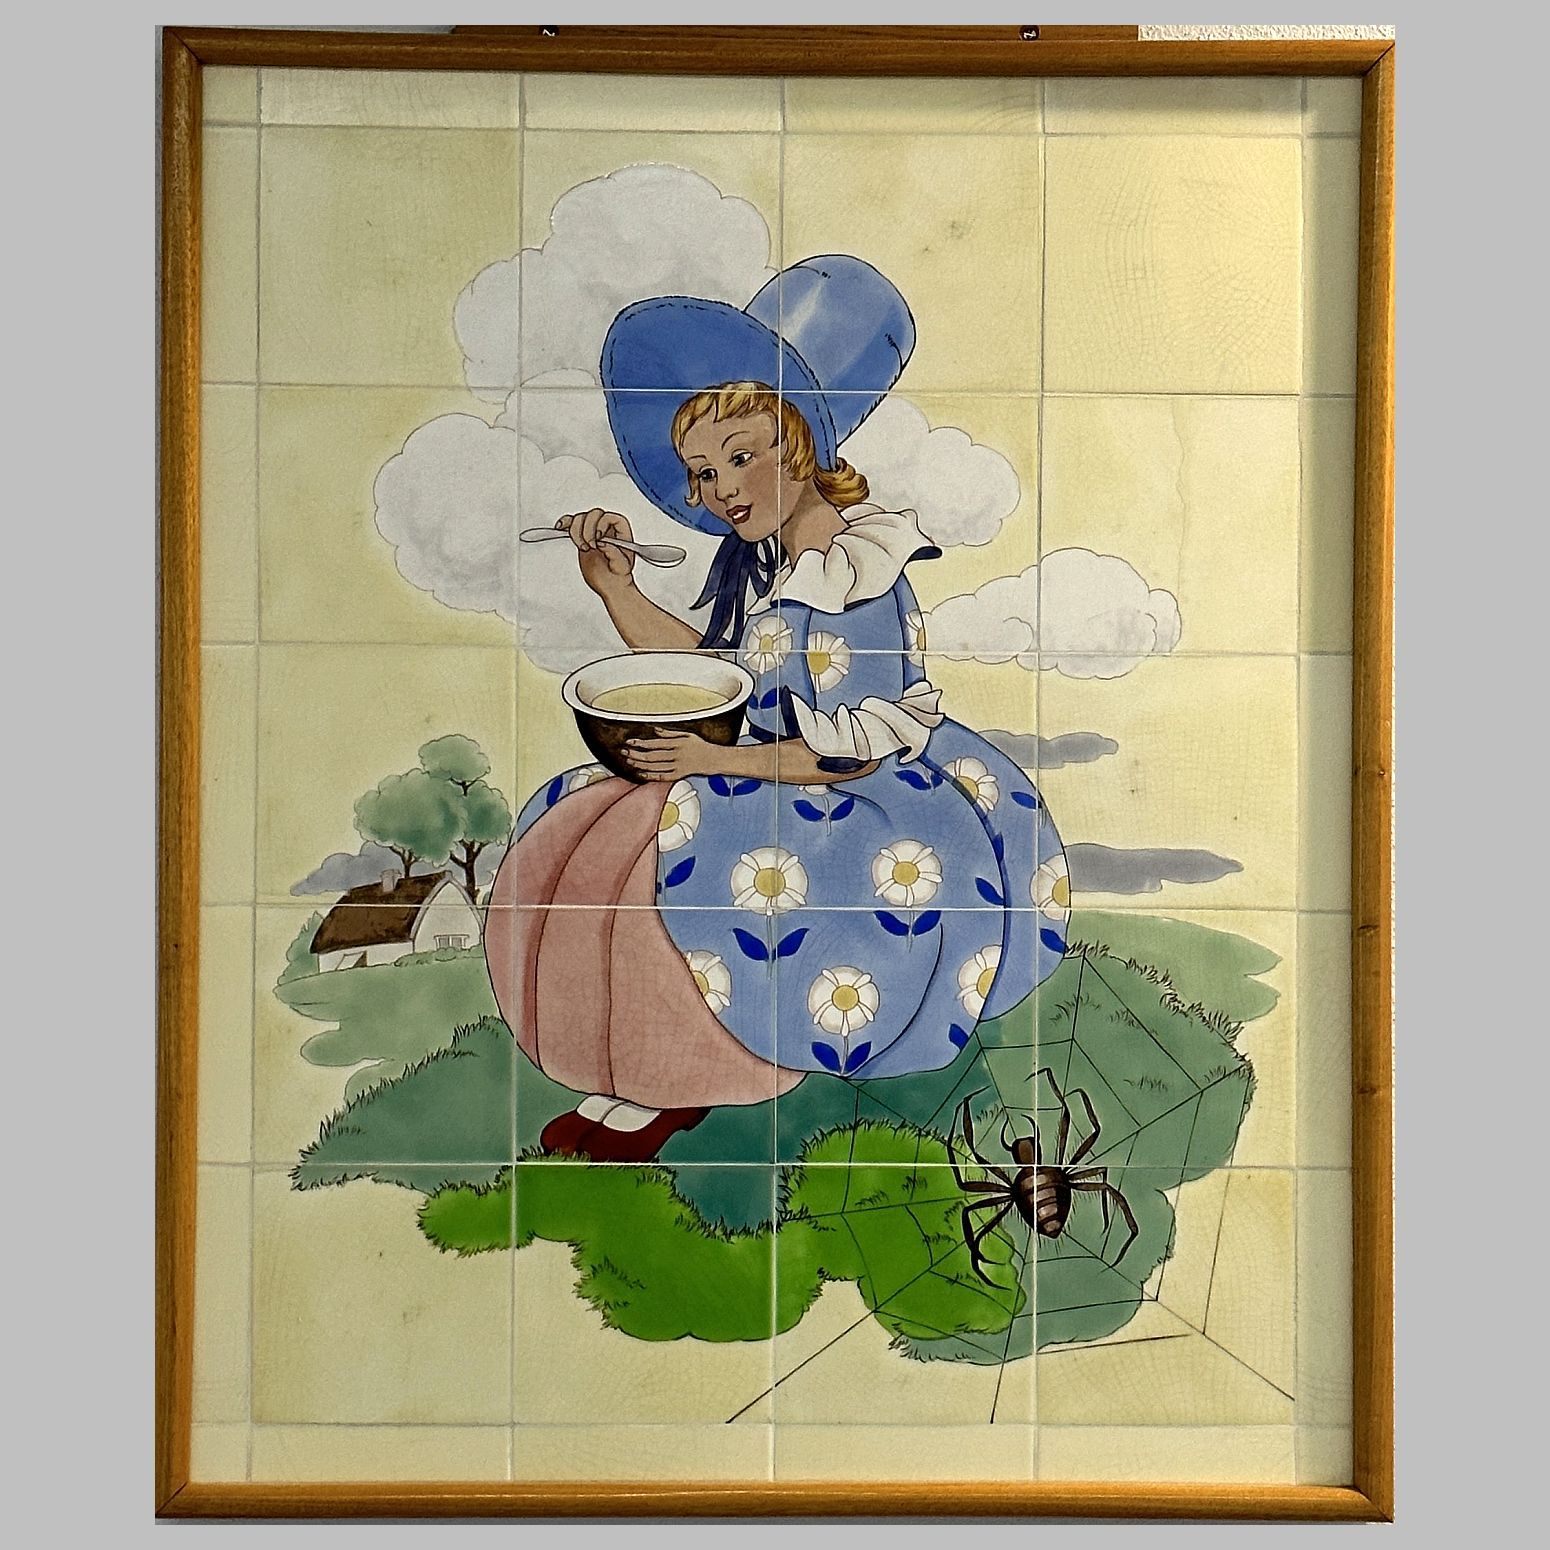 Little Miss Muffet nursery rhyme fairy tale scene painted on Doulton tiles (commissioned around 1900) from the Evelina Children's Hospital displayed in the long corridor at Guys' hospital.